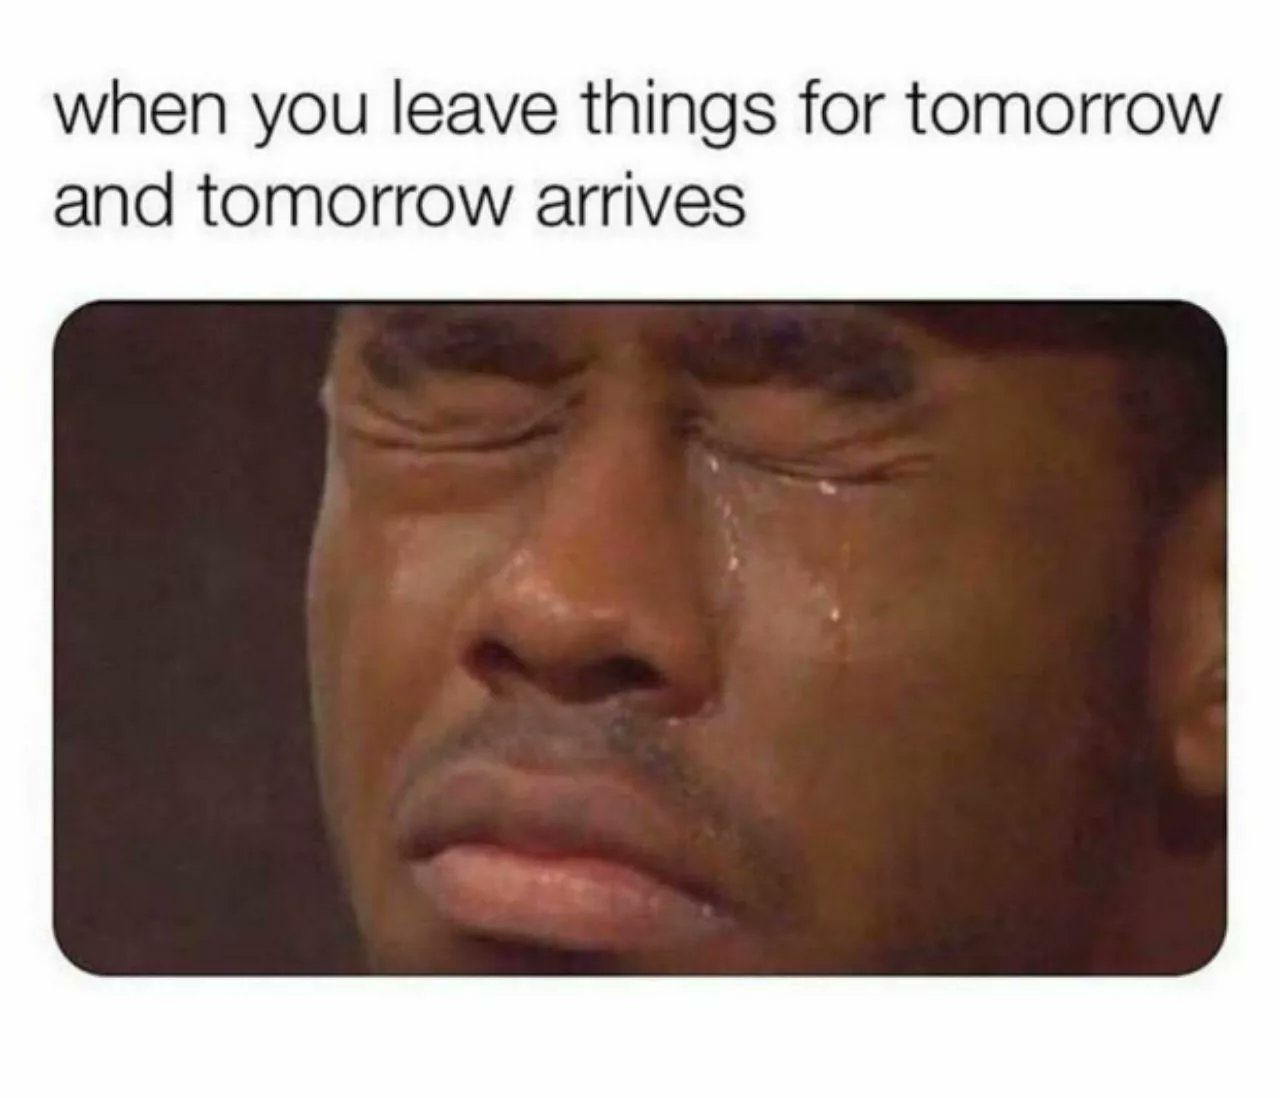 Internet meme - when you leave things for tomorrow and tomorrow arrives